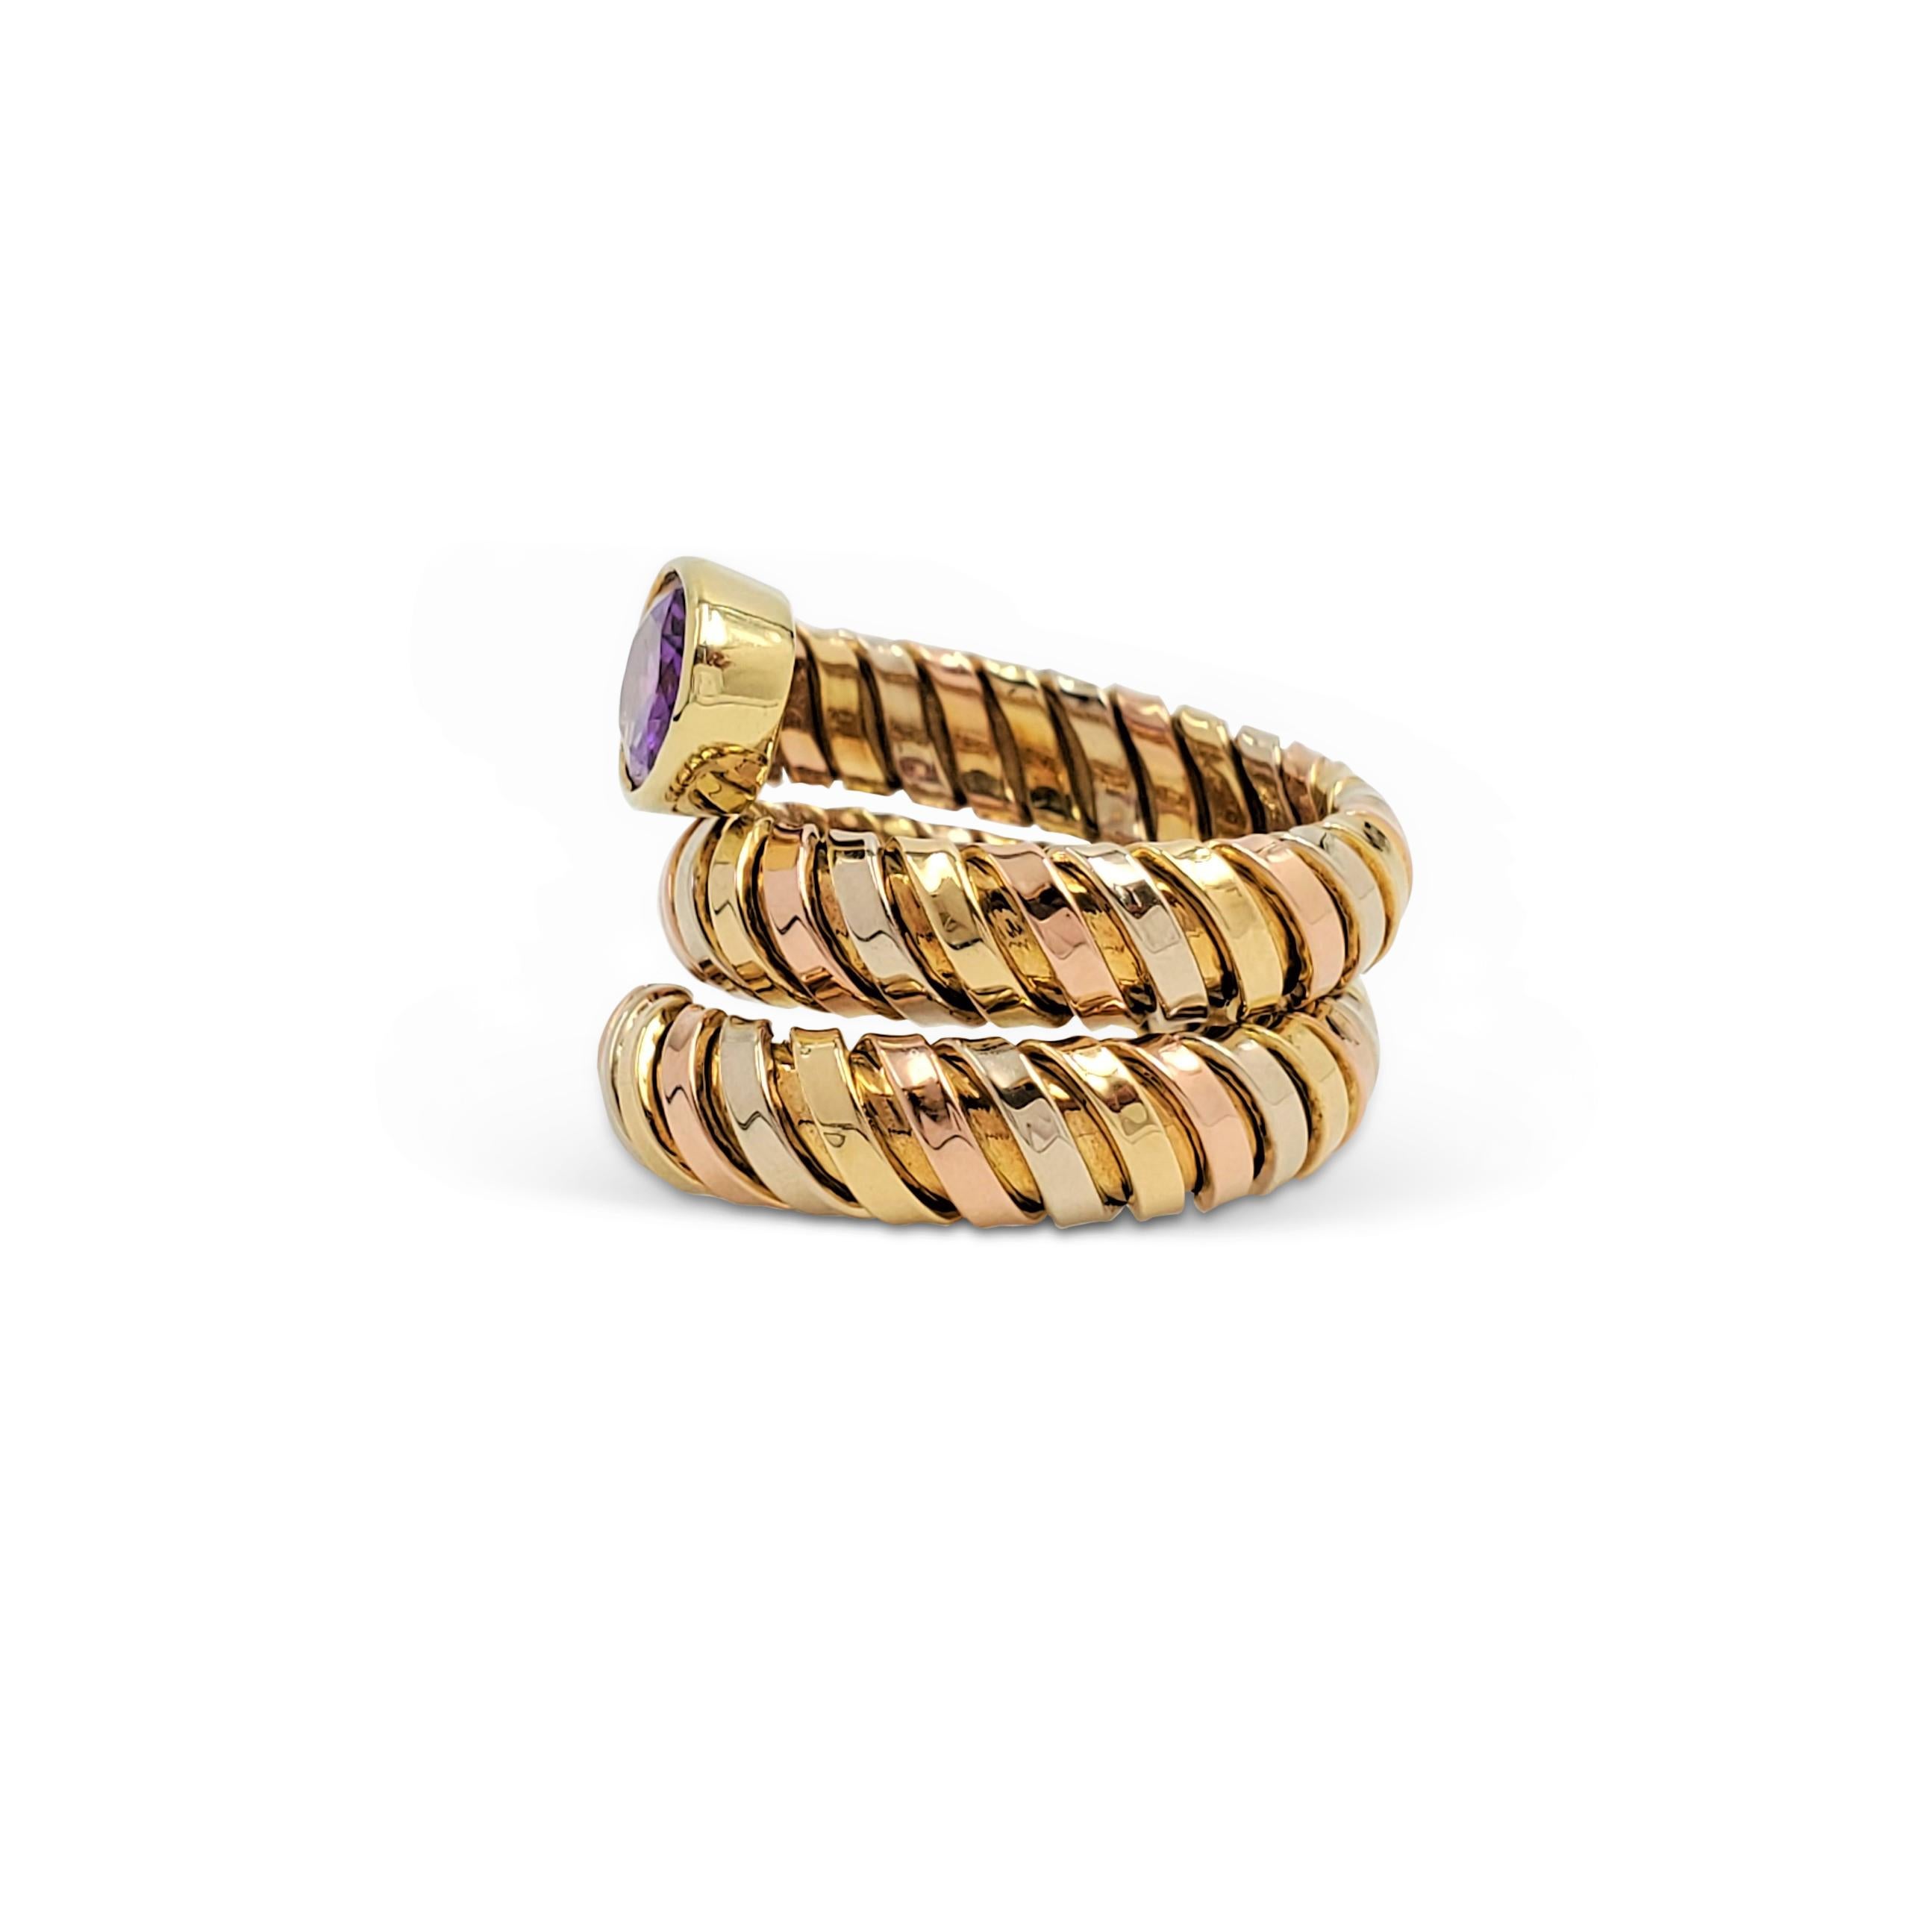 Intriguing spiral ring crafted in 18 karat Yellow, Rose, and White gold in the 'tubogas' style made famous by Bvlgari. Set with a lovely faceted oval cut amethyst, the ring sits comfortably on the finger thanks to its spiraled construction. US size